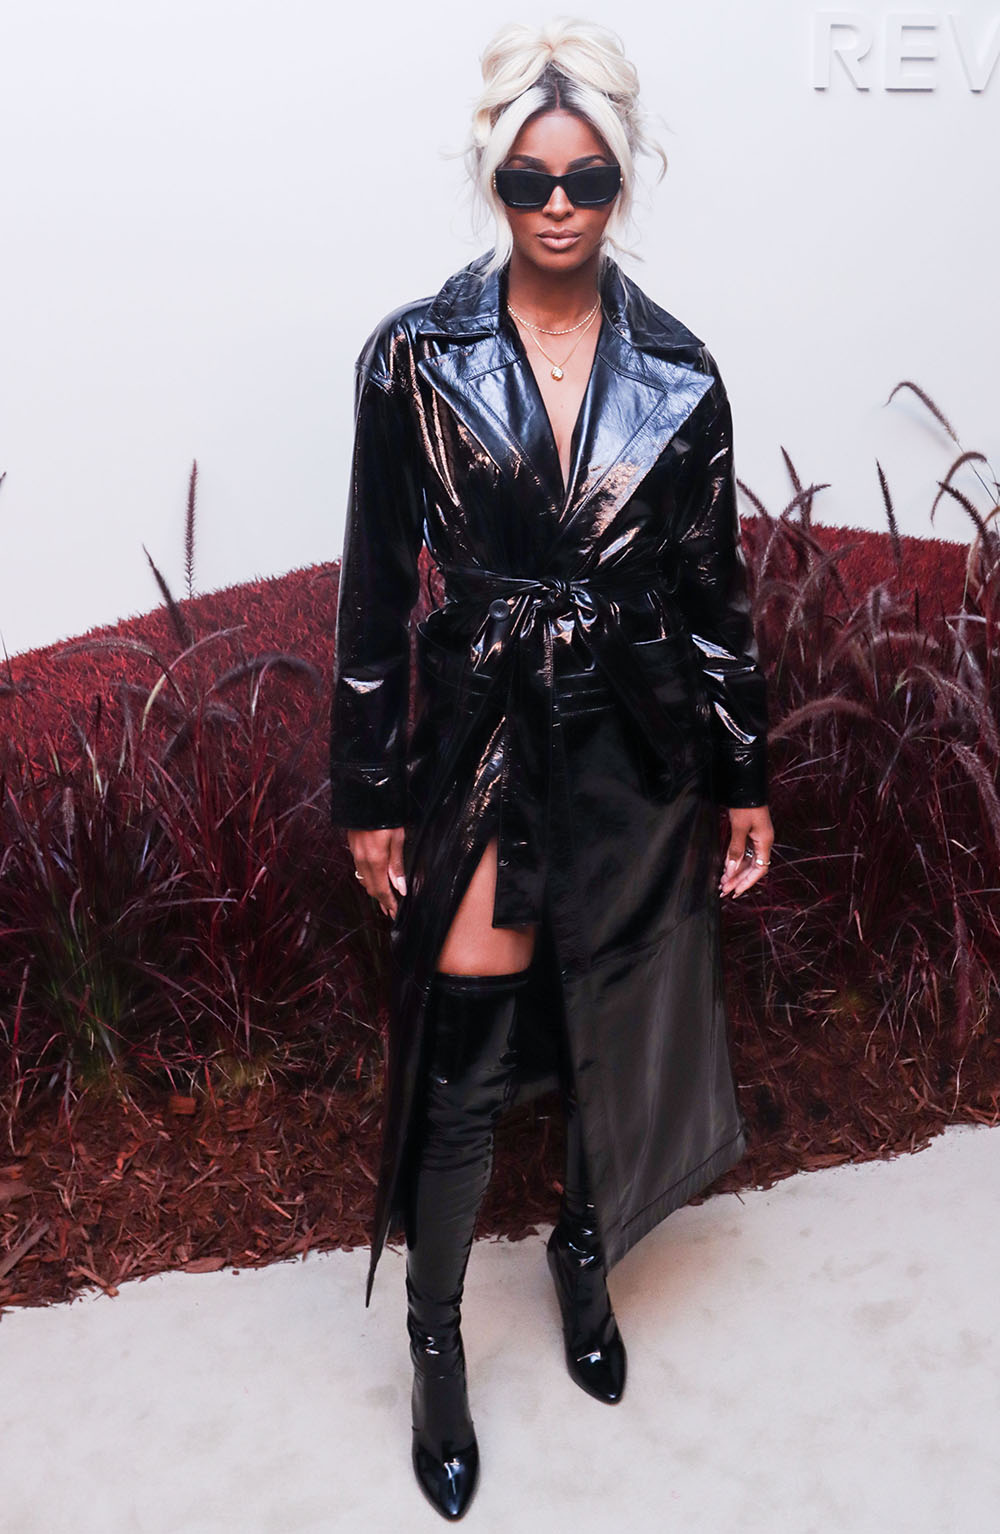 Ciara went for a Matrix-chic look at the opening of REVOLVE Gallery during New York Fashion Week